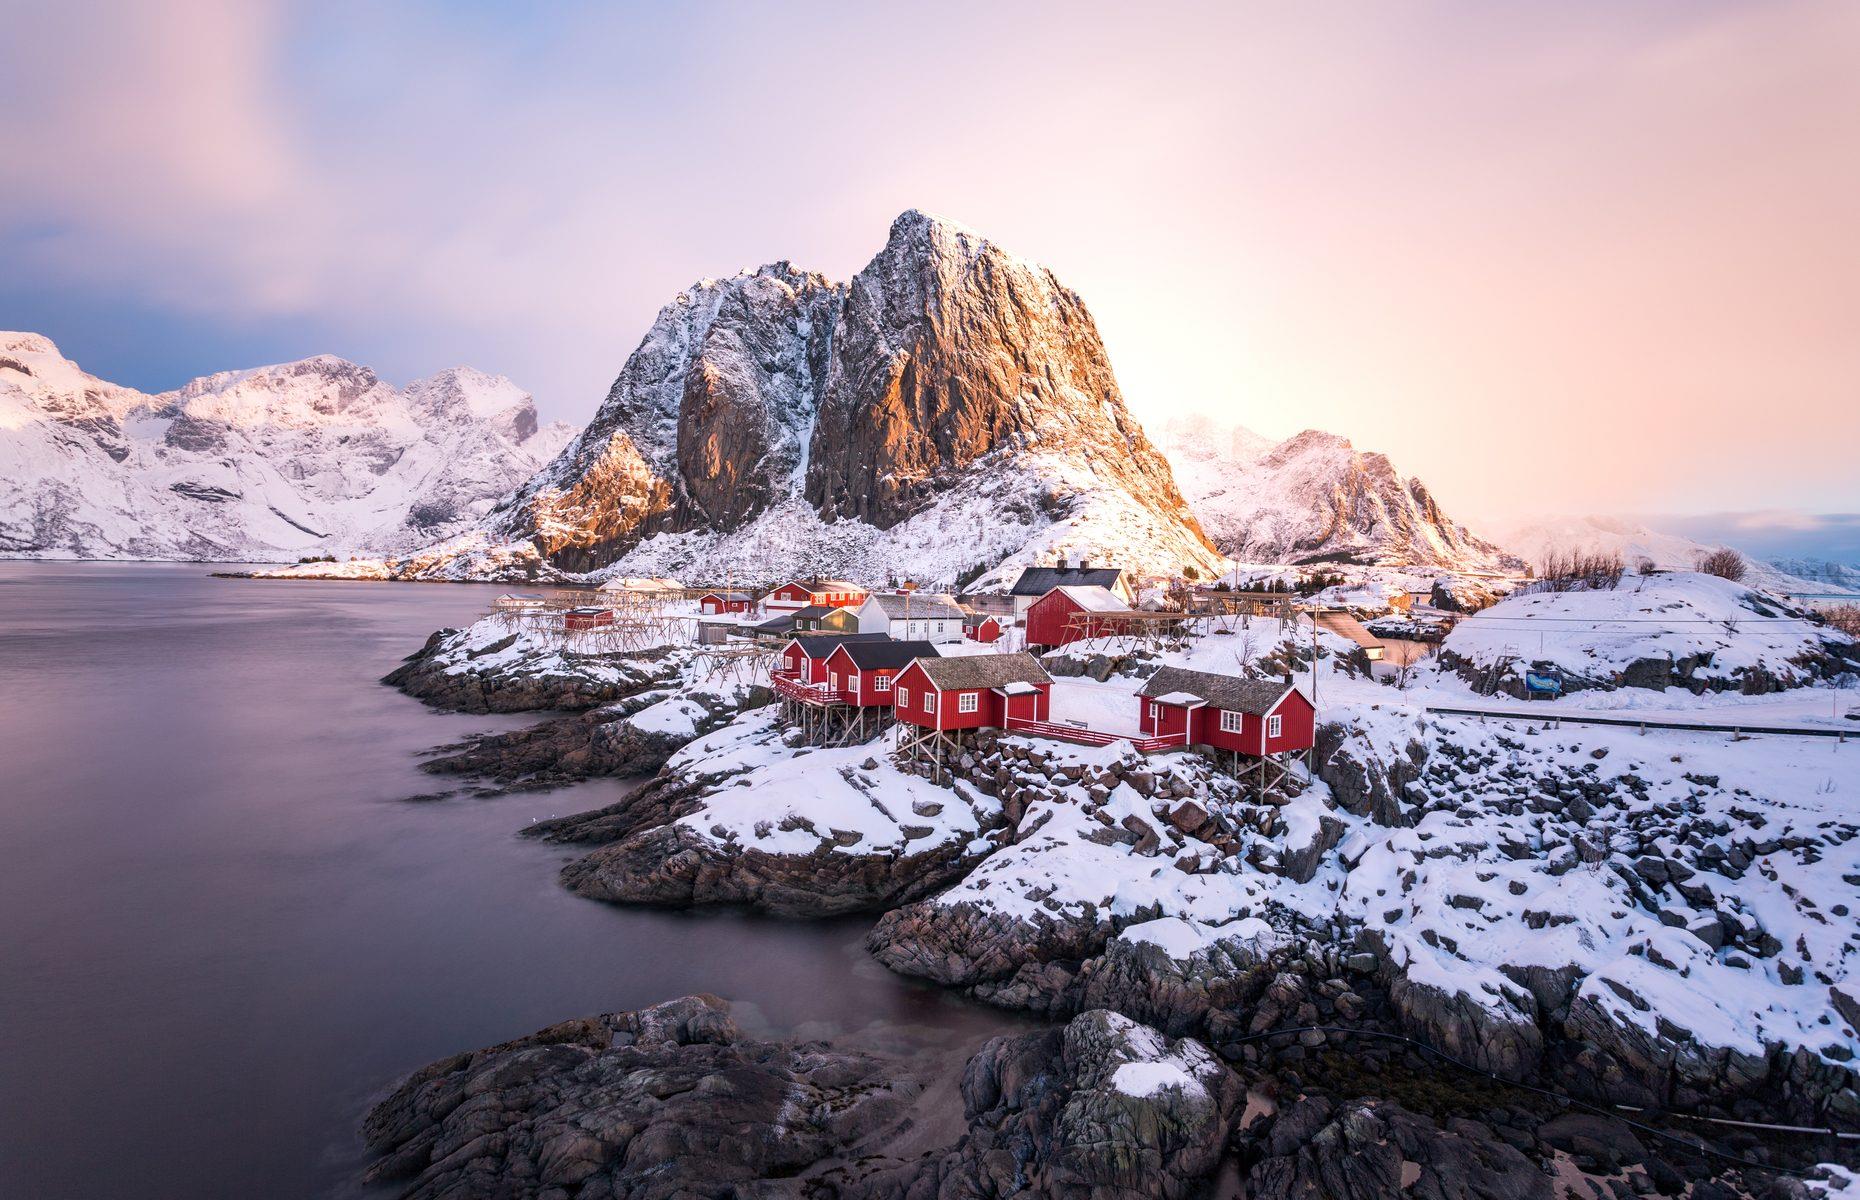 Draped in snow and bathed in violet-tinged sunlight in this photograph, Hamnøy’s colorful wooden houses, stacked onto the cliffs on stilts, certainly look like the stuff of fantasy. Located on its own small island in Norway’s Lofoten Islands, Hamnøy started life as a fishing village some 1,000 years ago. Wooden cabins were used to house fishermen when they came to visit for an annual fishing event – the oldest that still stand today date back to 1890.